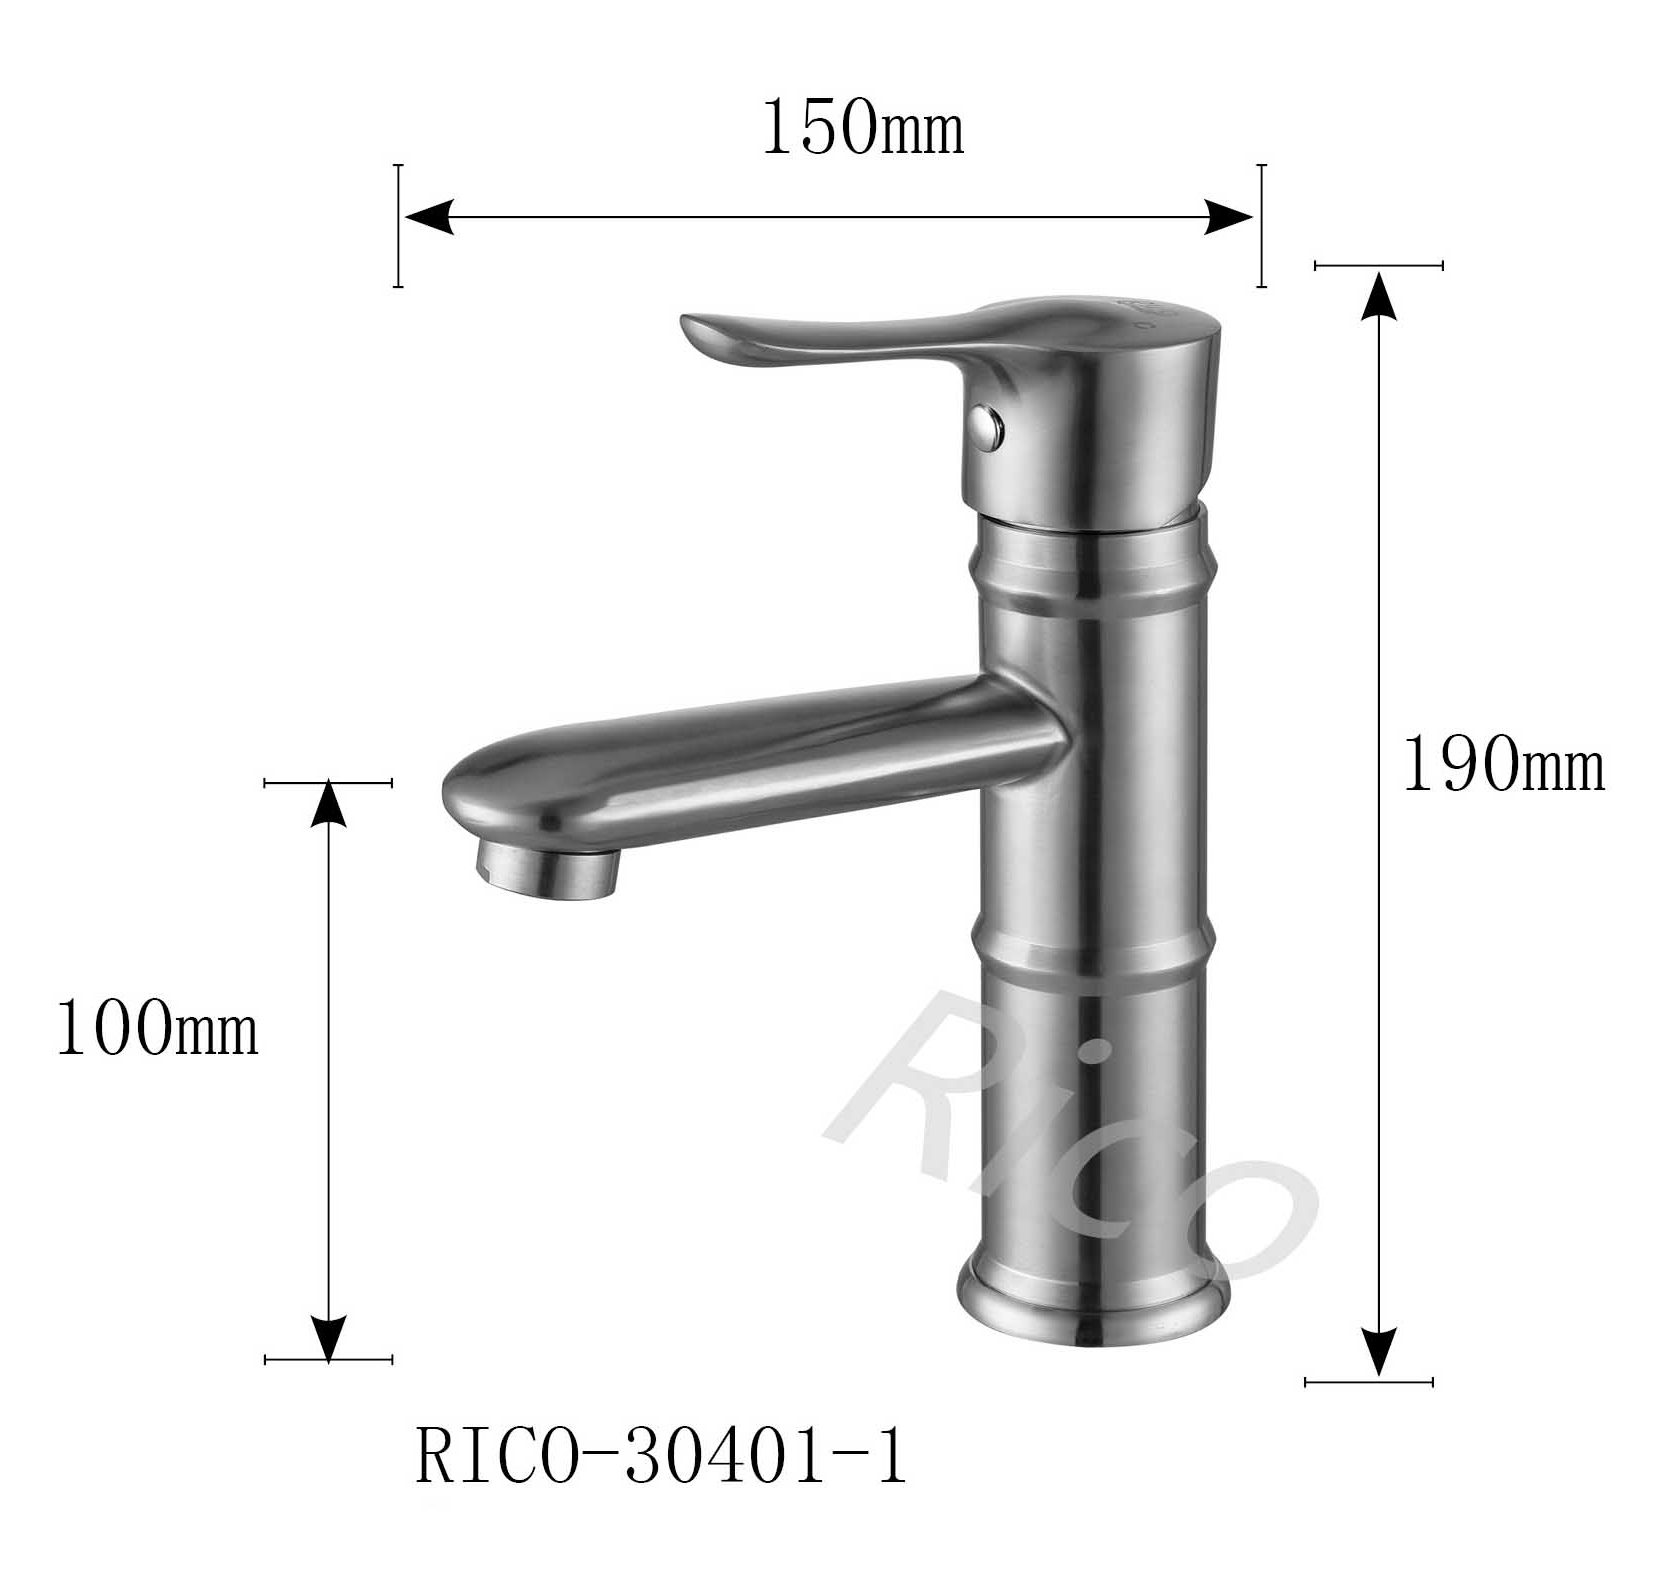 Rico : Stainless Steel Basin Mixer – RICO-30401-1